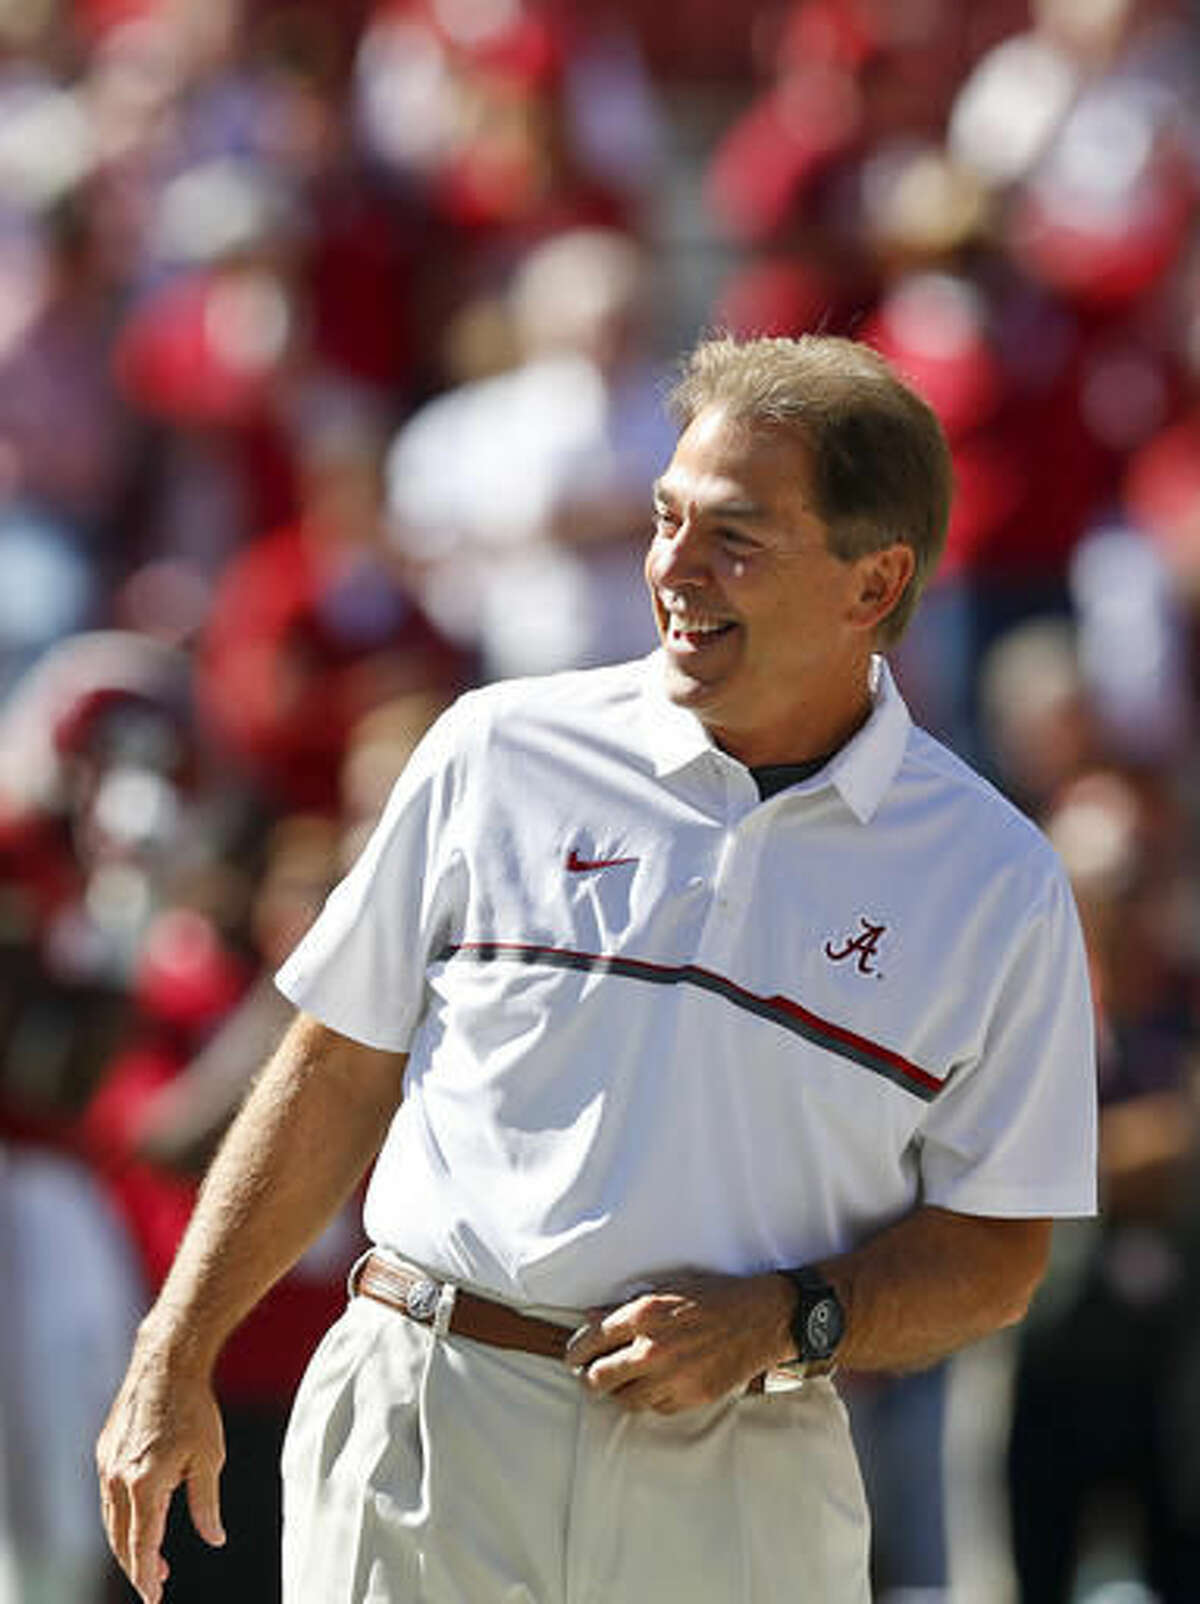 Alabama head coach Nick Saban laughs in the middle of the field before an NCAA college football game against Texas A&M, Saturday, Oct. 22, 2016, in Tuscaloosa, Ala. (AP Photo/Brynn Anderson)